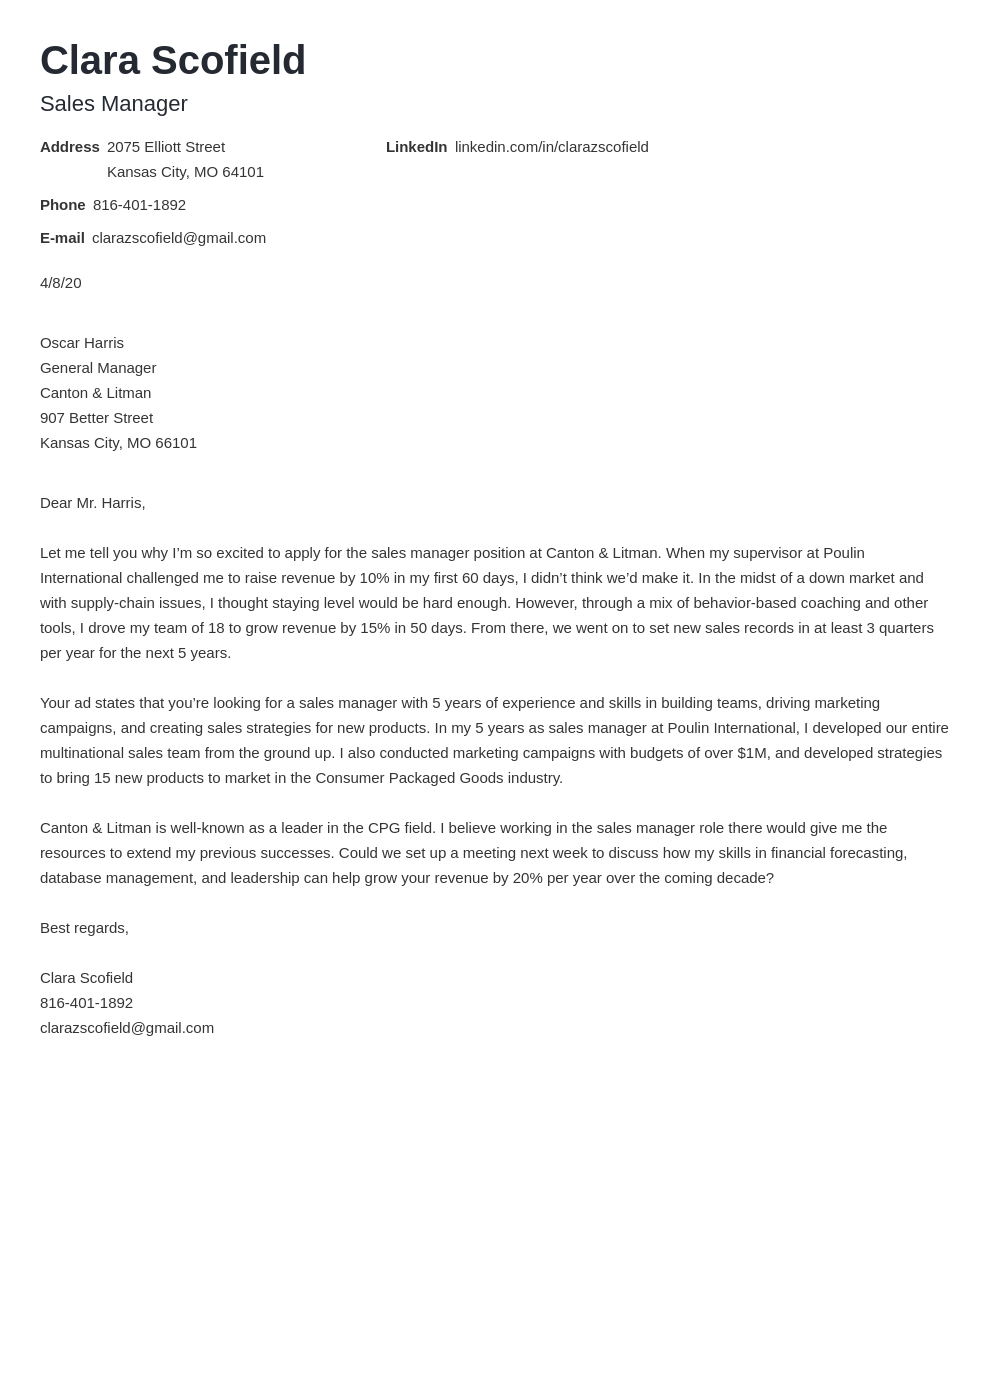 example cover letter for sales management job